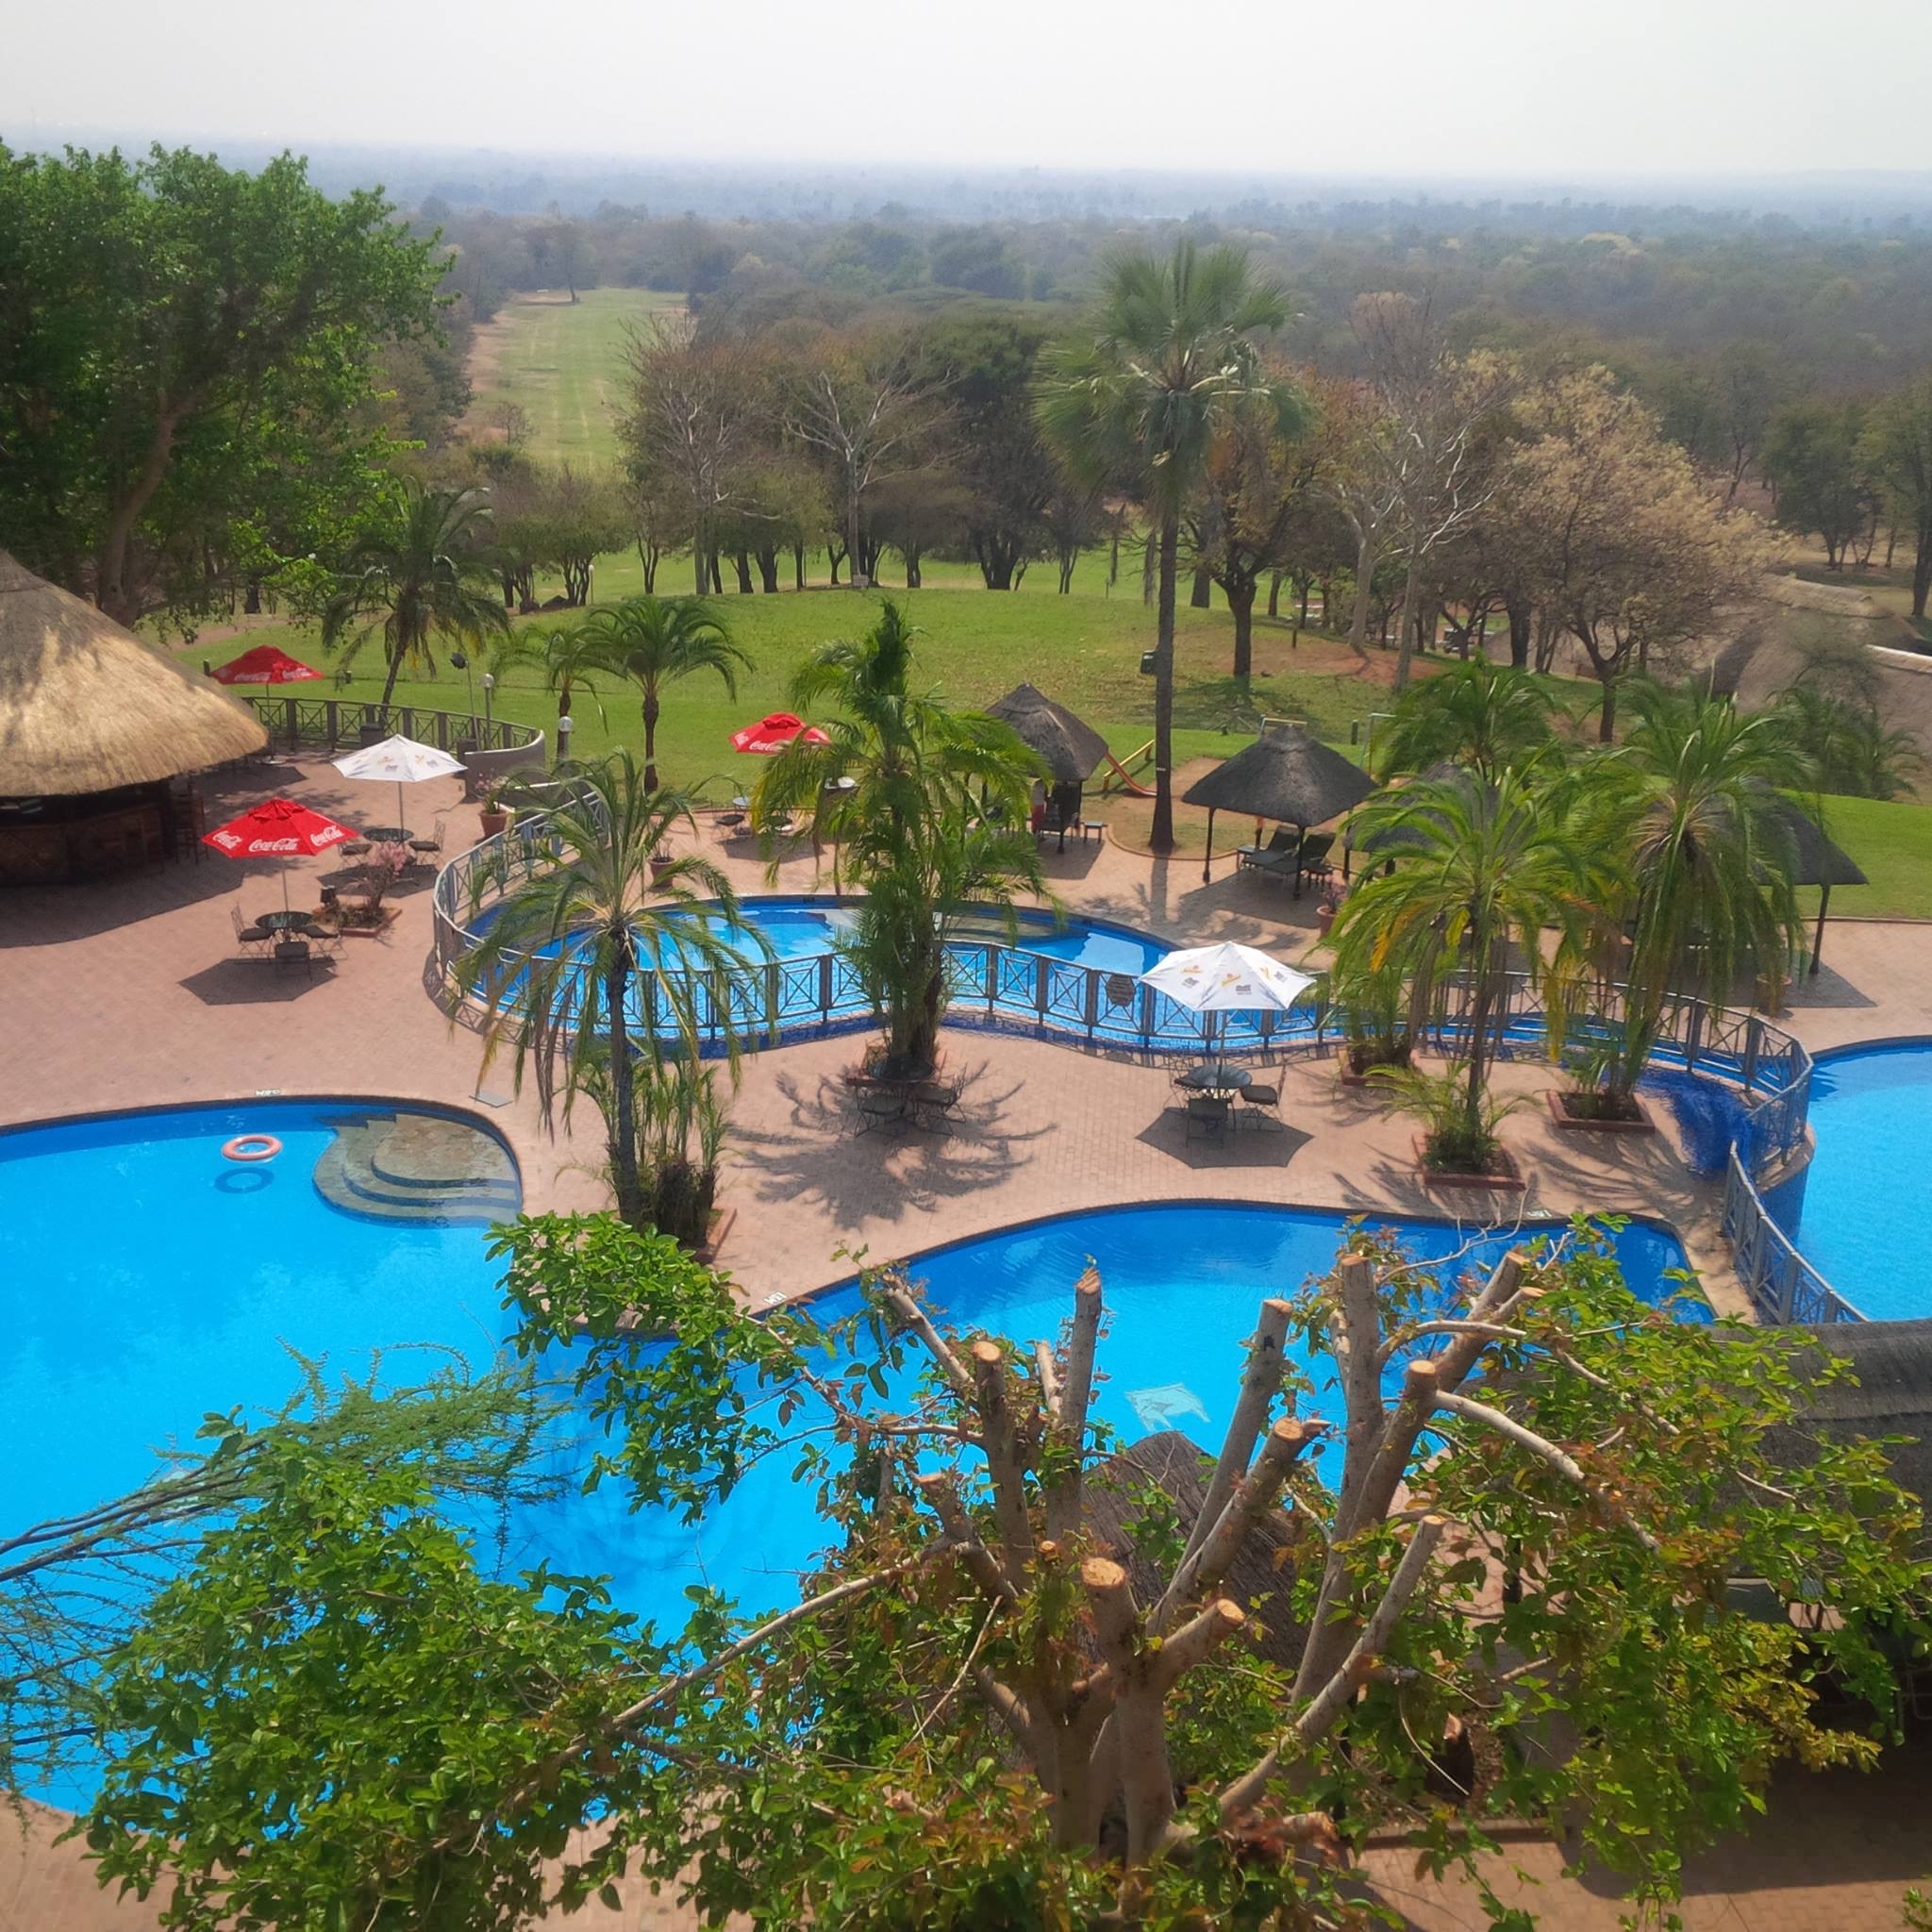 The hotel view in Vic Falls, Zimbabwe.